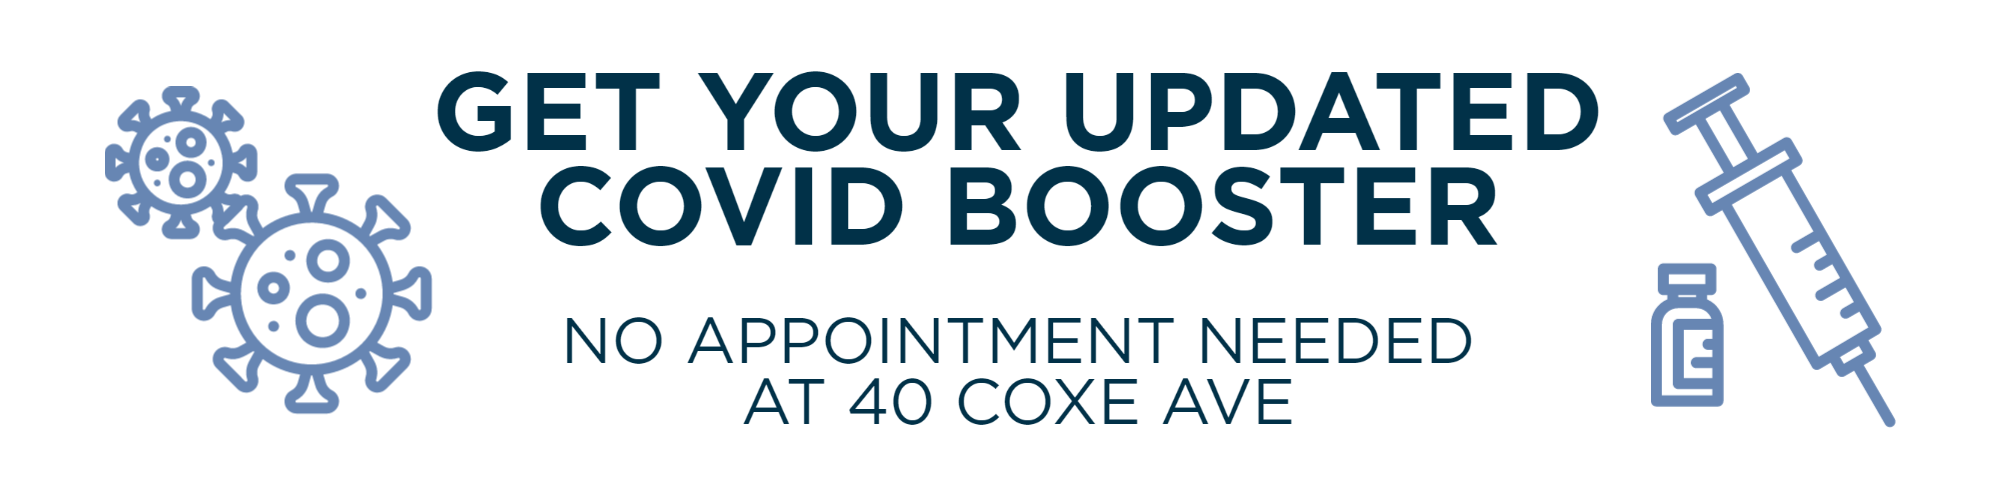 Get your updated COVID booster, no appointment needed at 40 Coxe Ave